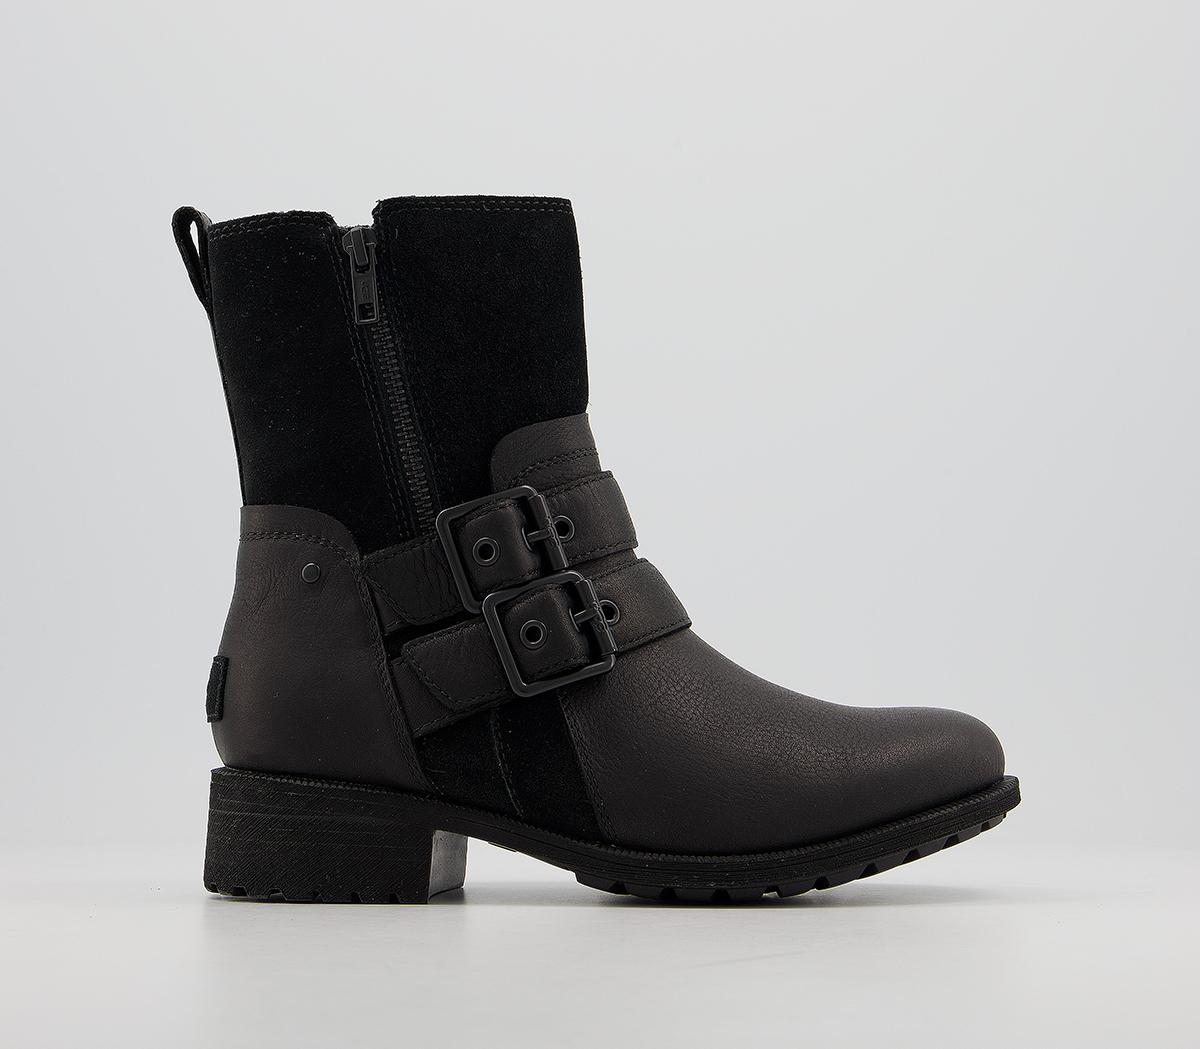 UGG Wilde Boots Black Suede - Ankle Boots